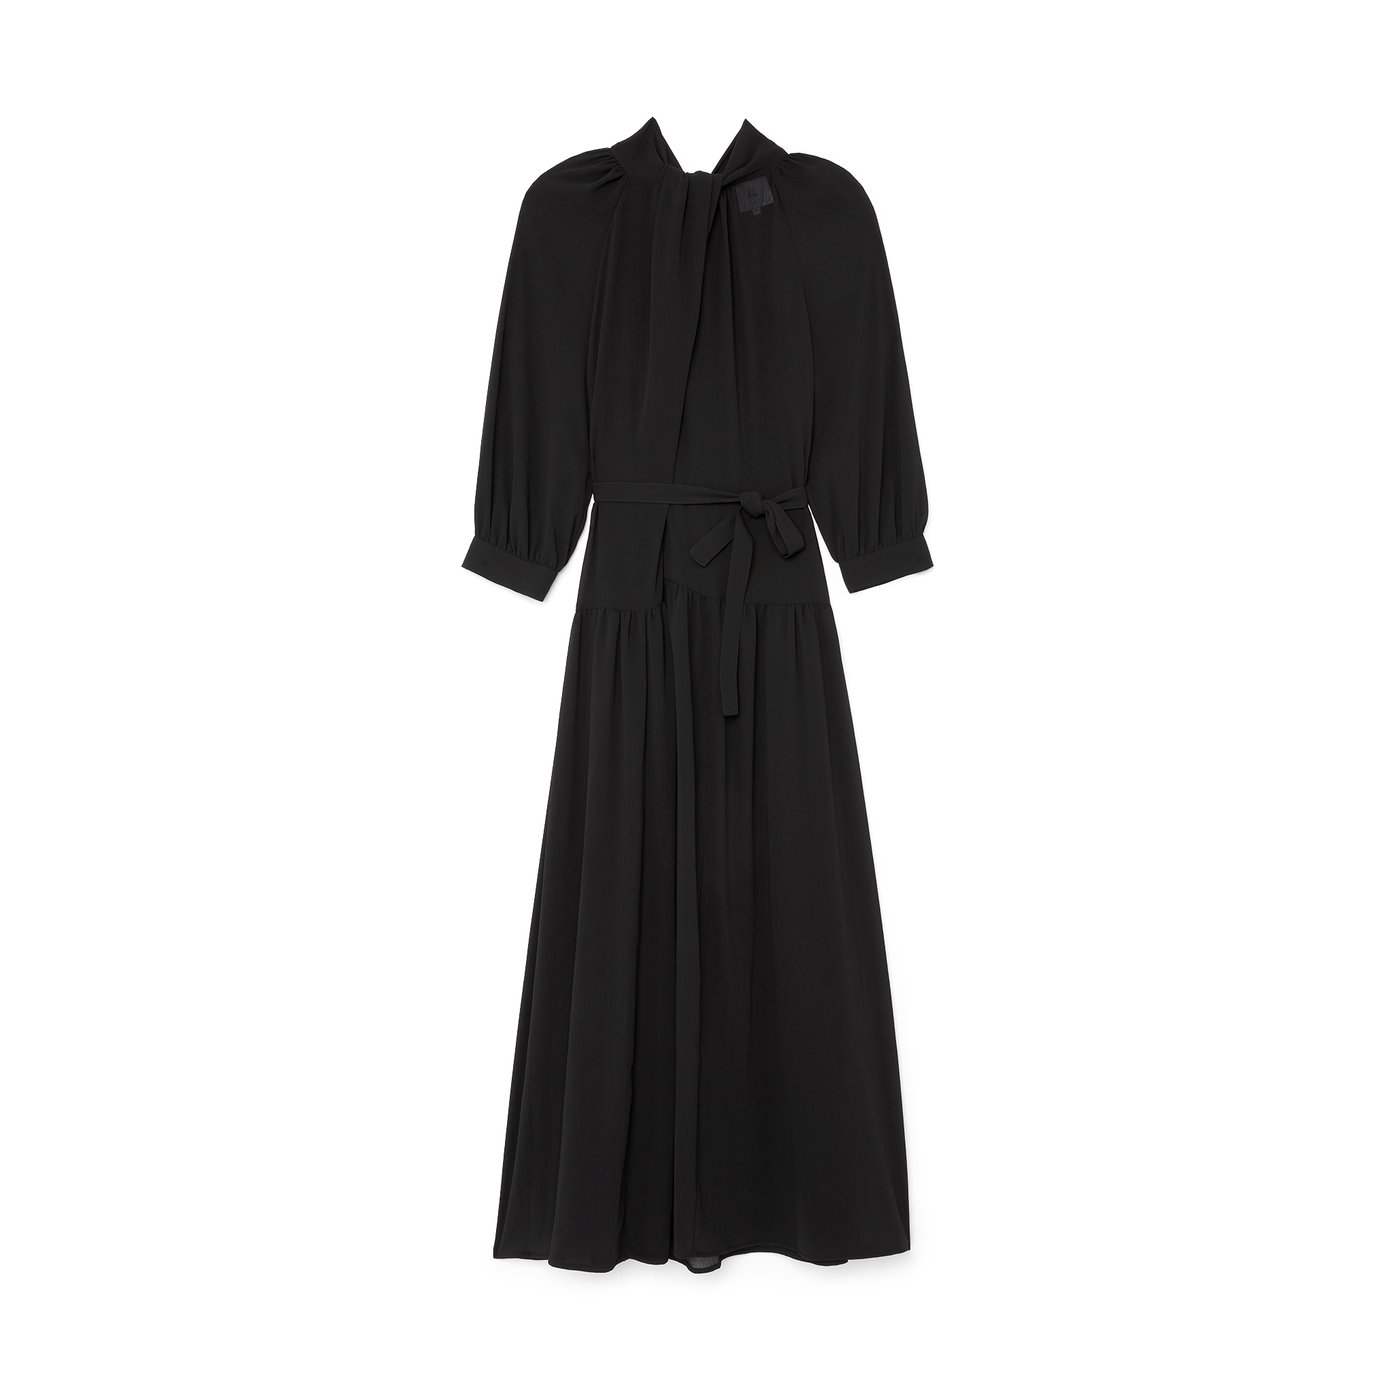 Camberlyn Pleat-Neck Midlength Dress | goop